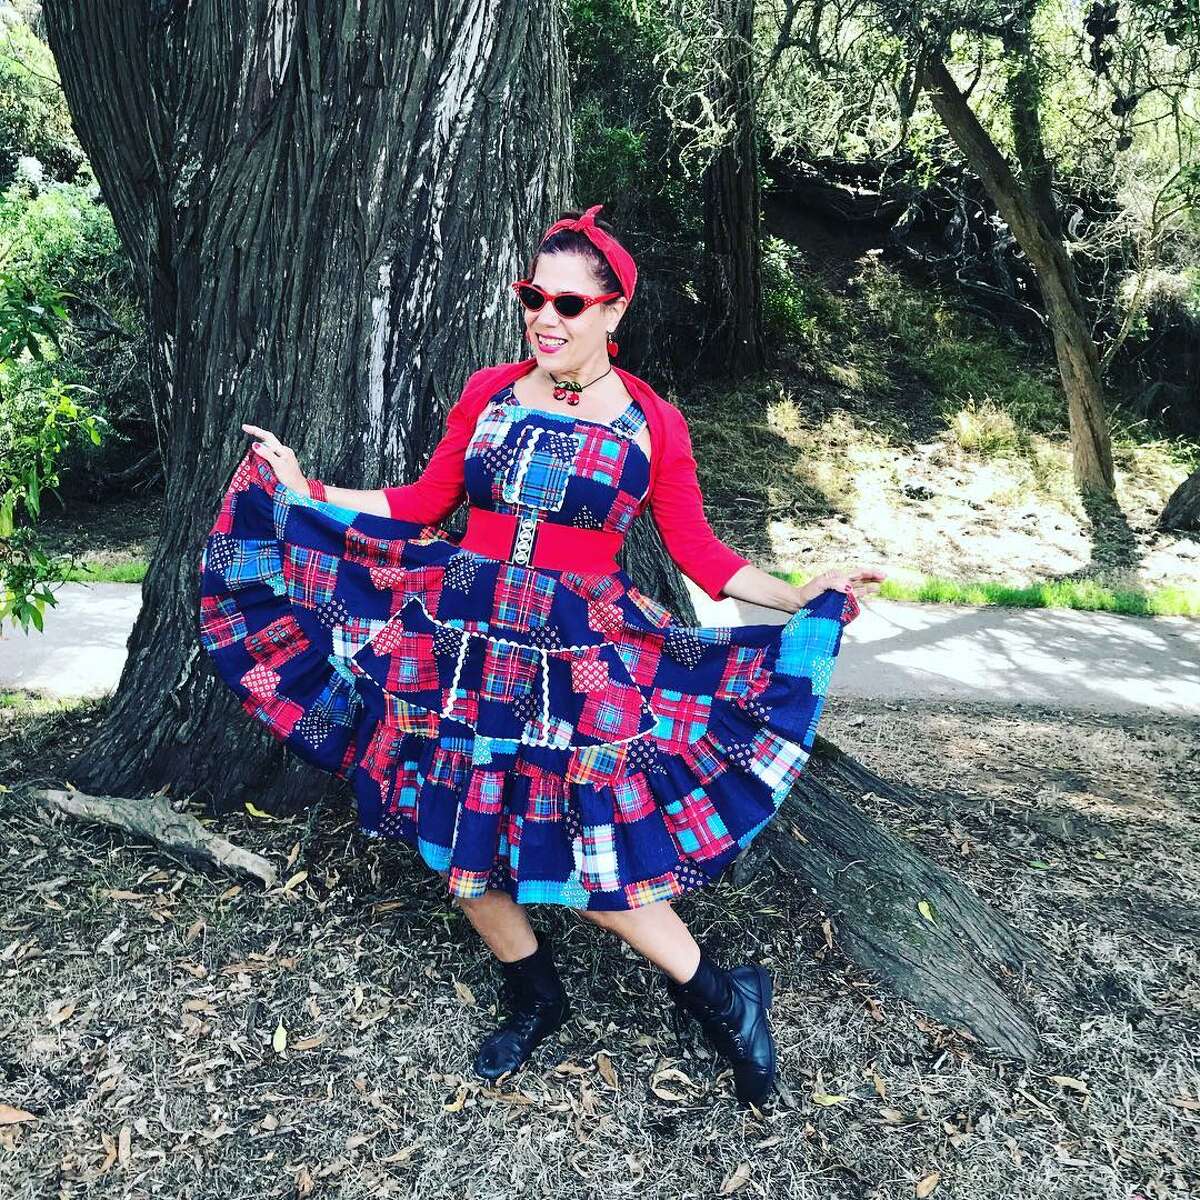 Music fans show off their personal style at Hardly Strictly Bluegrass 2018.